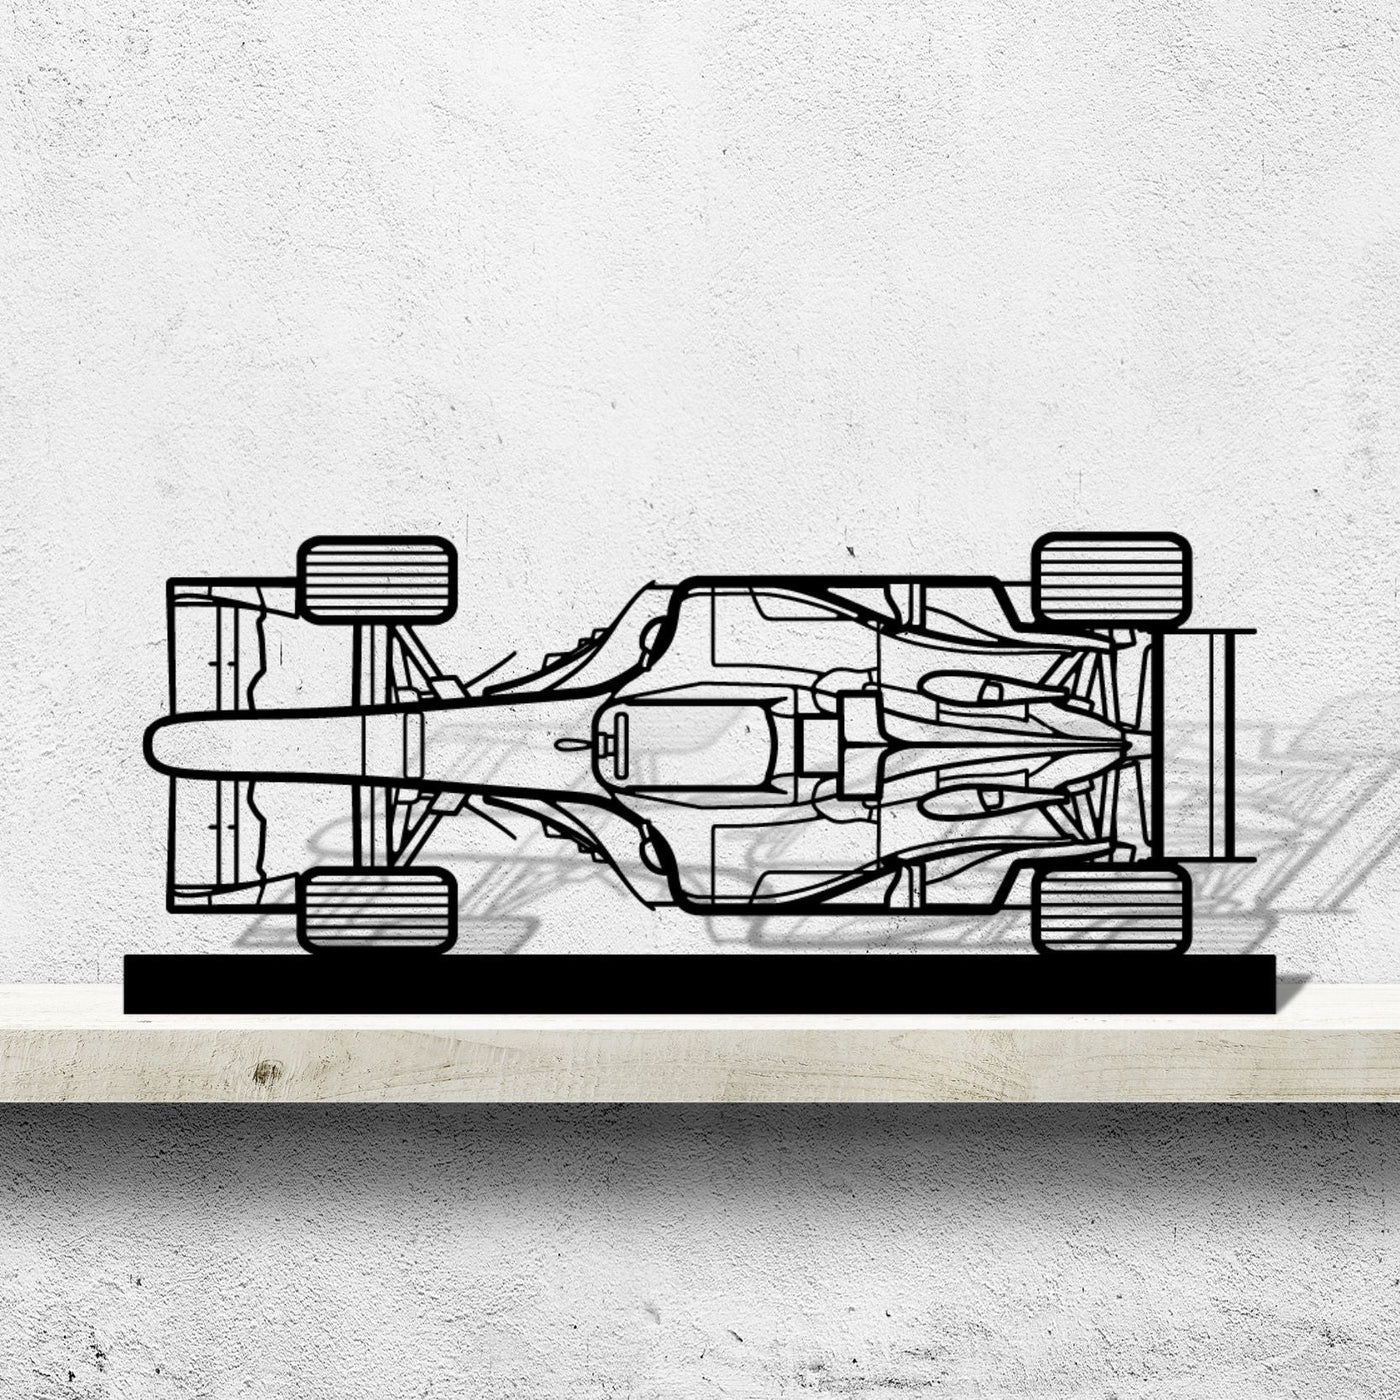 F1 2004 Top View Silhouette Metal Art Stand